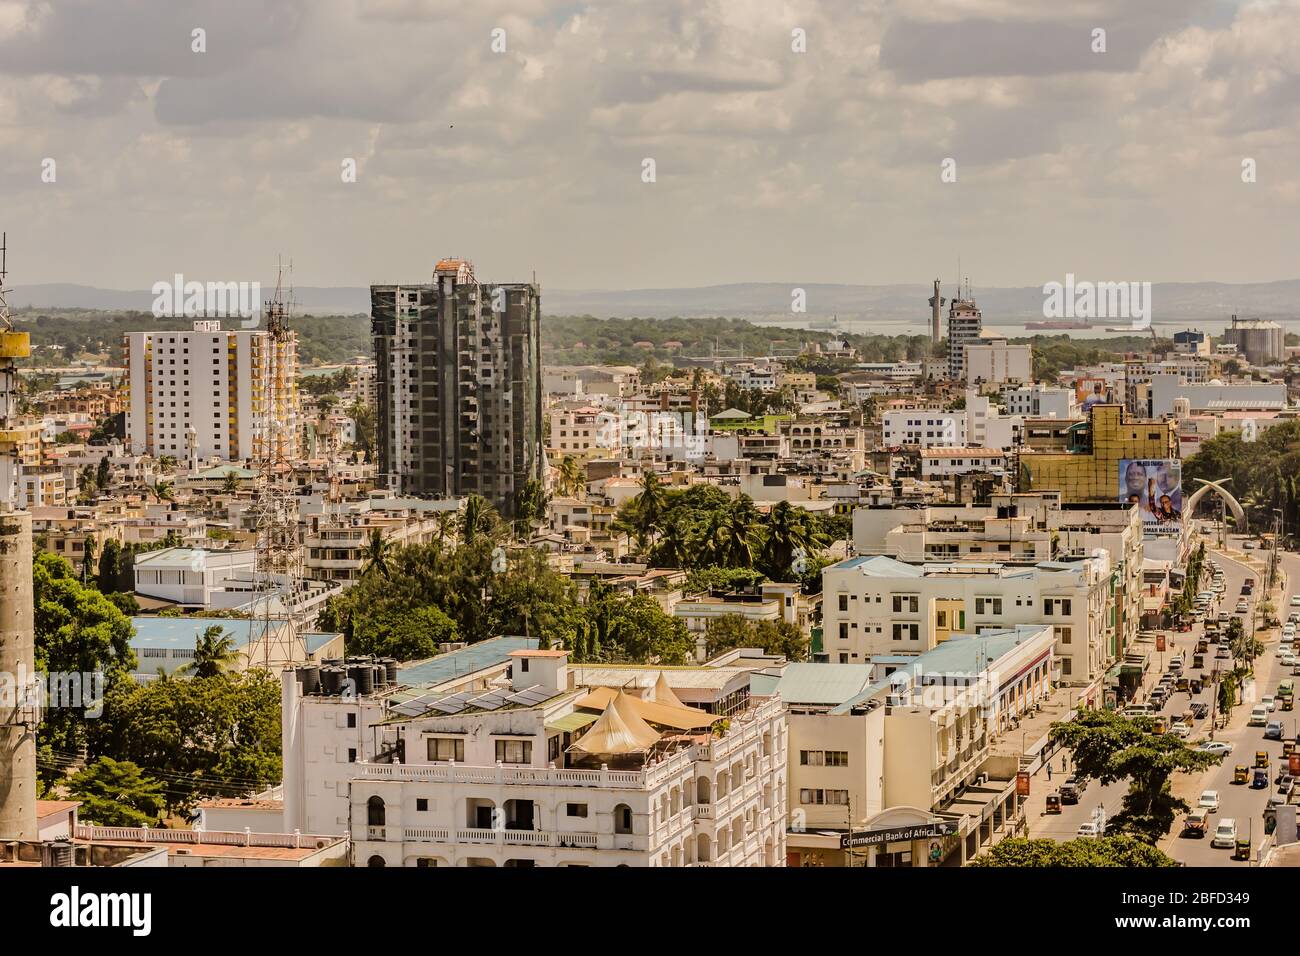 A view of Mombasa town with the port in the background Stock Photo